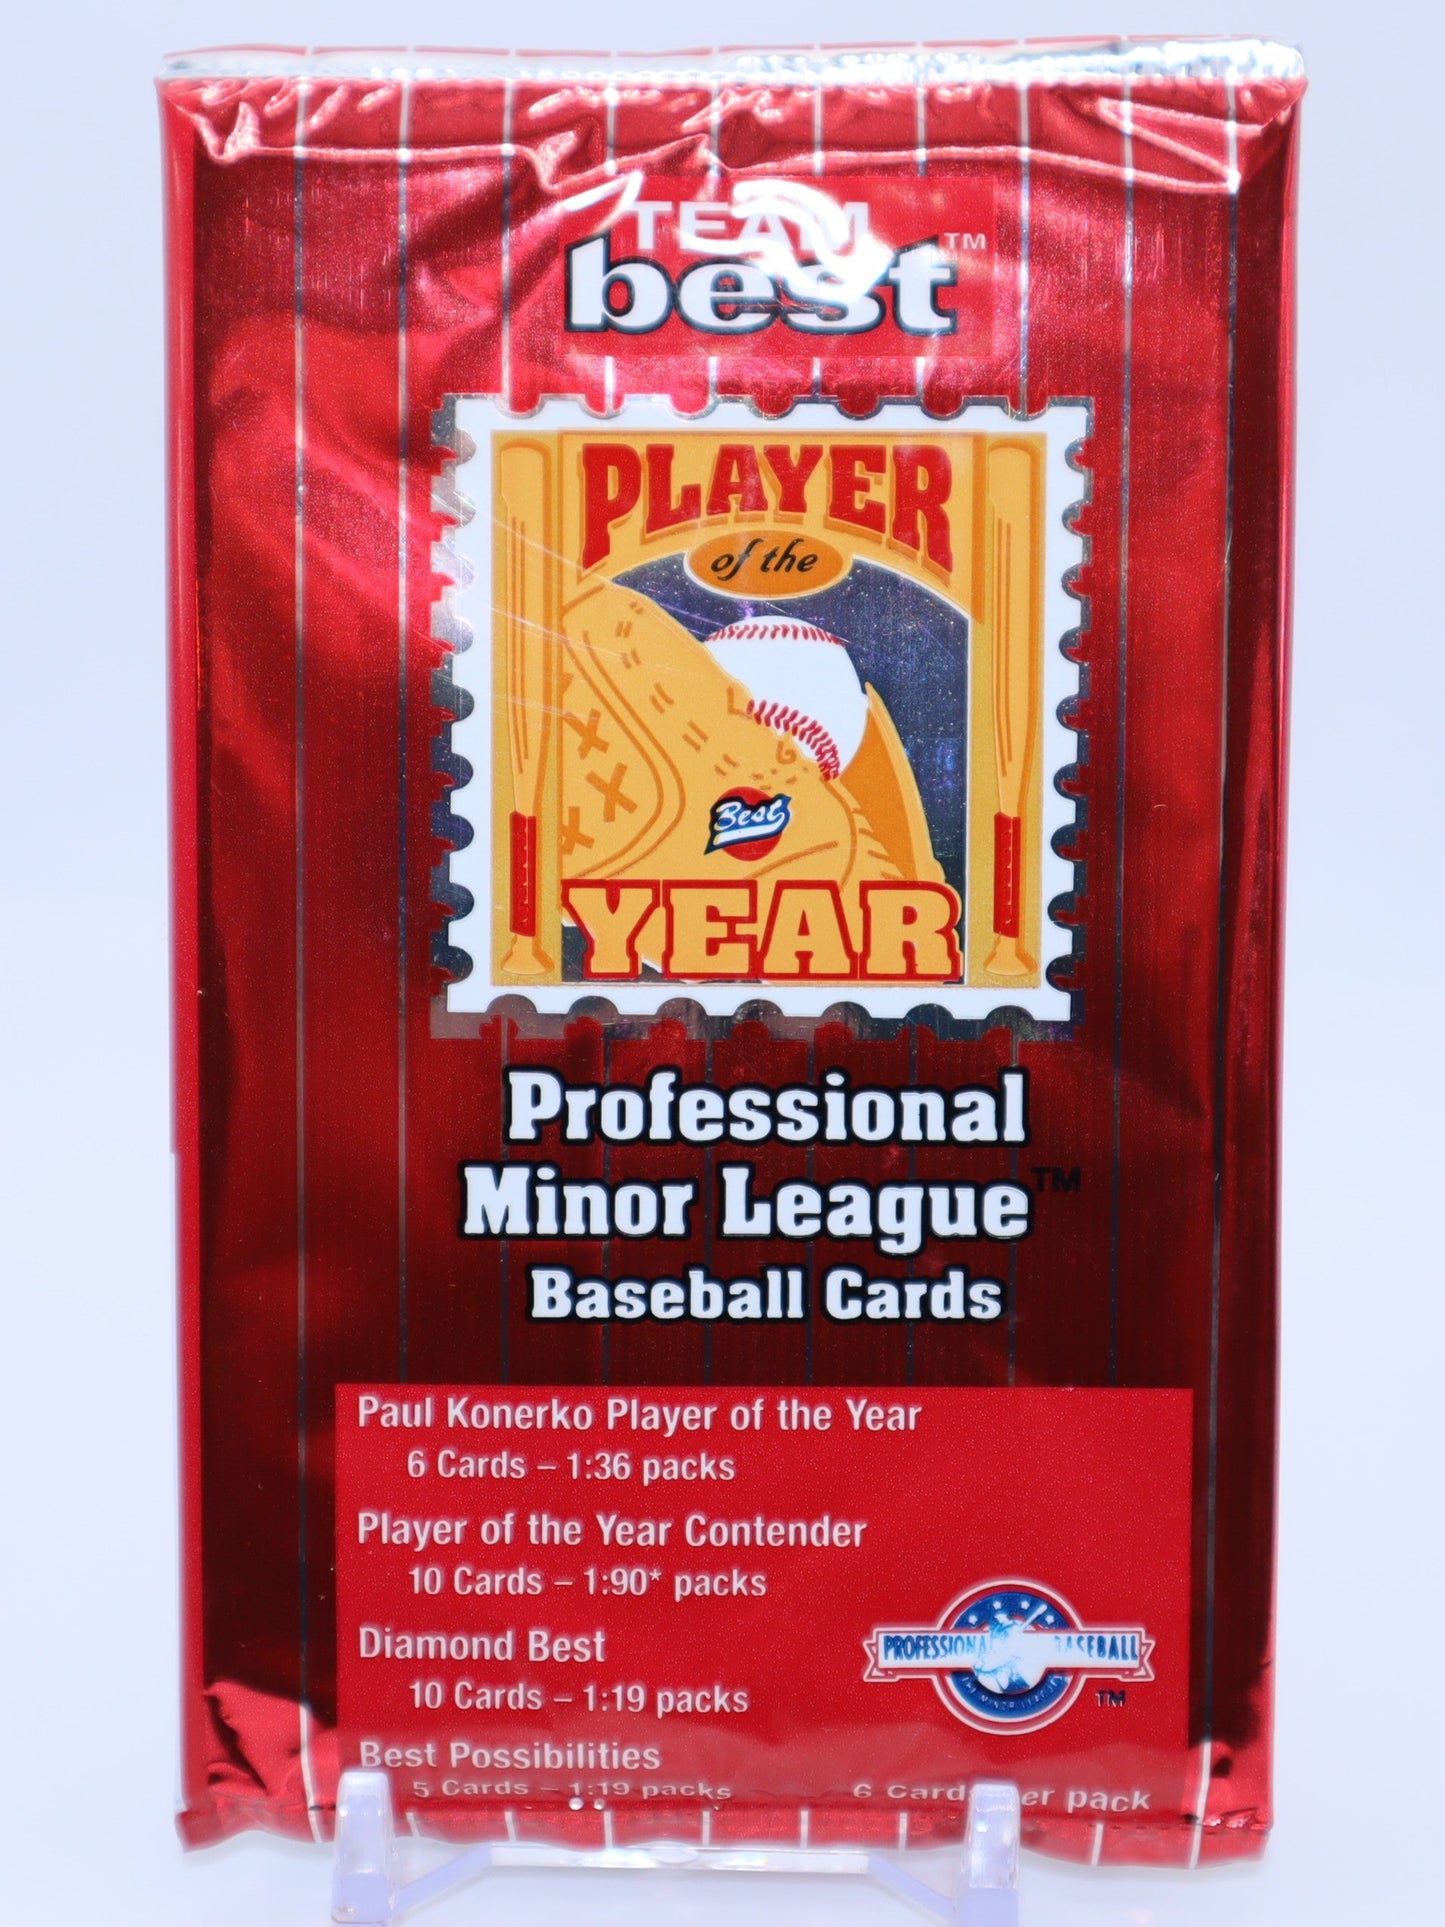 1998 Team Best Minor League Baseball Cards Wax Pack - Collectibles